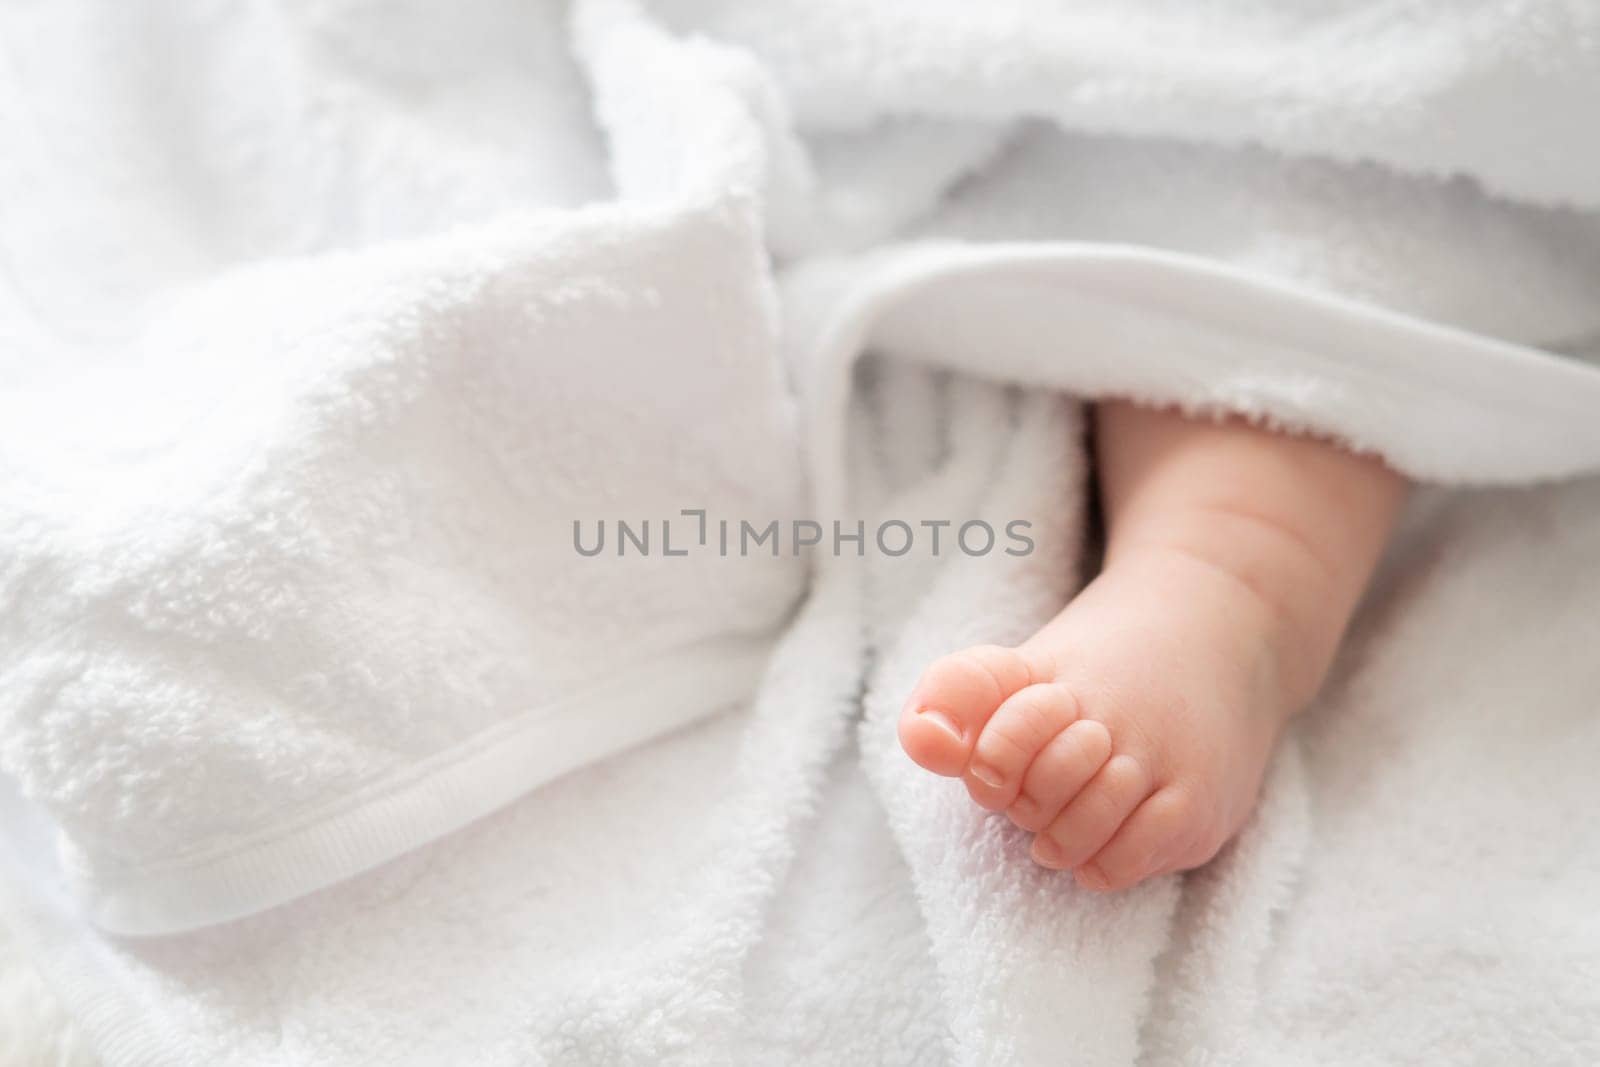 Infant's imprint: baby foot shyly emerging from white fabric by Mariakray